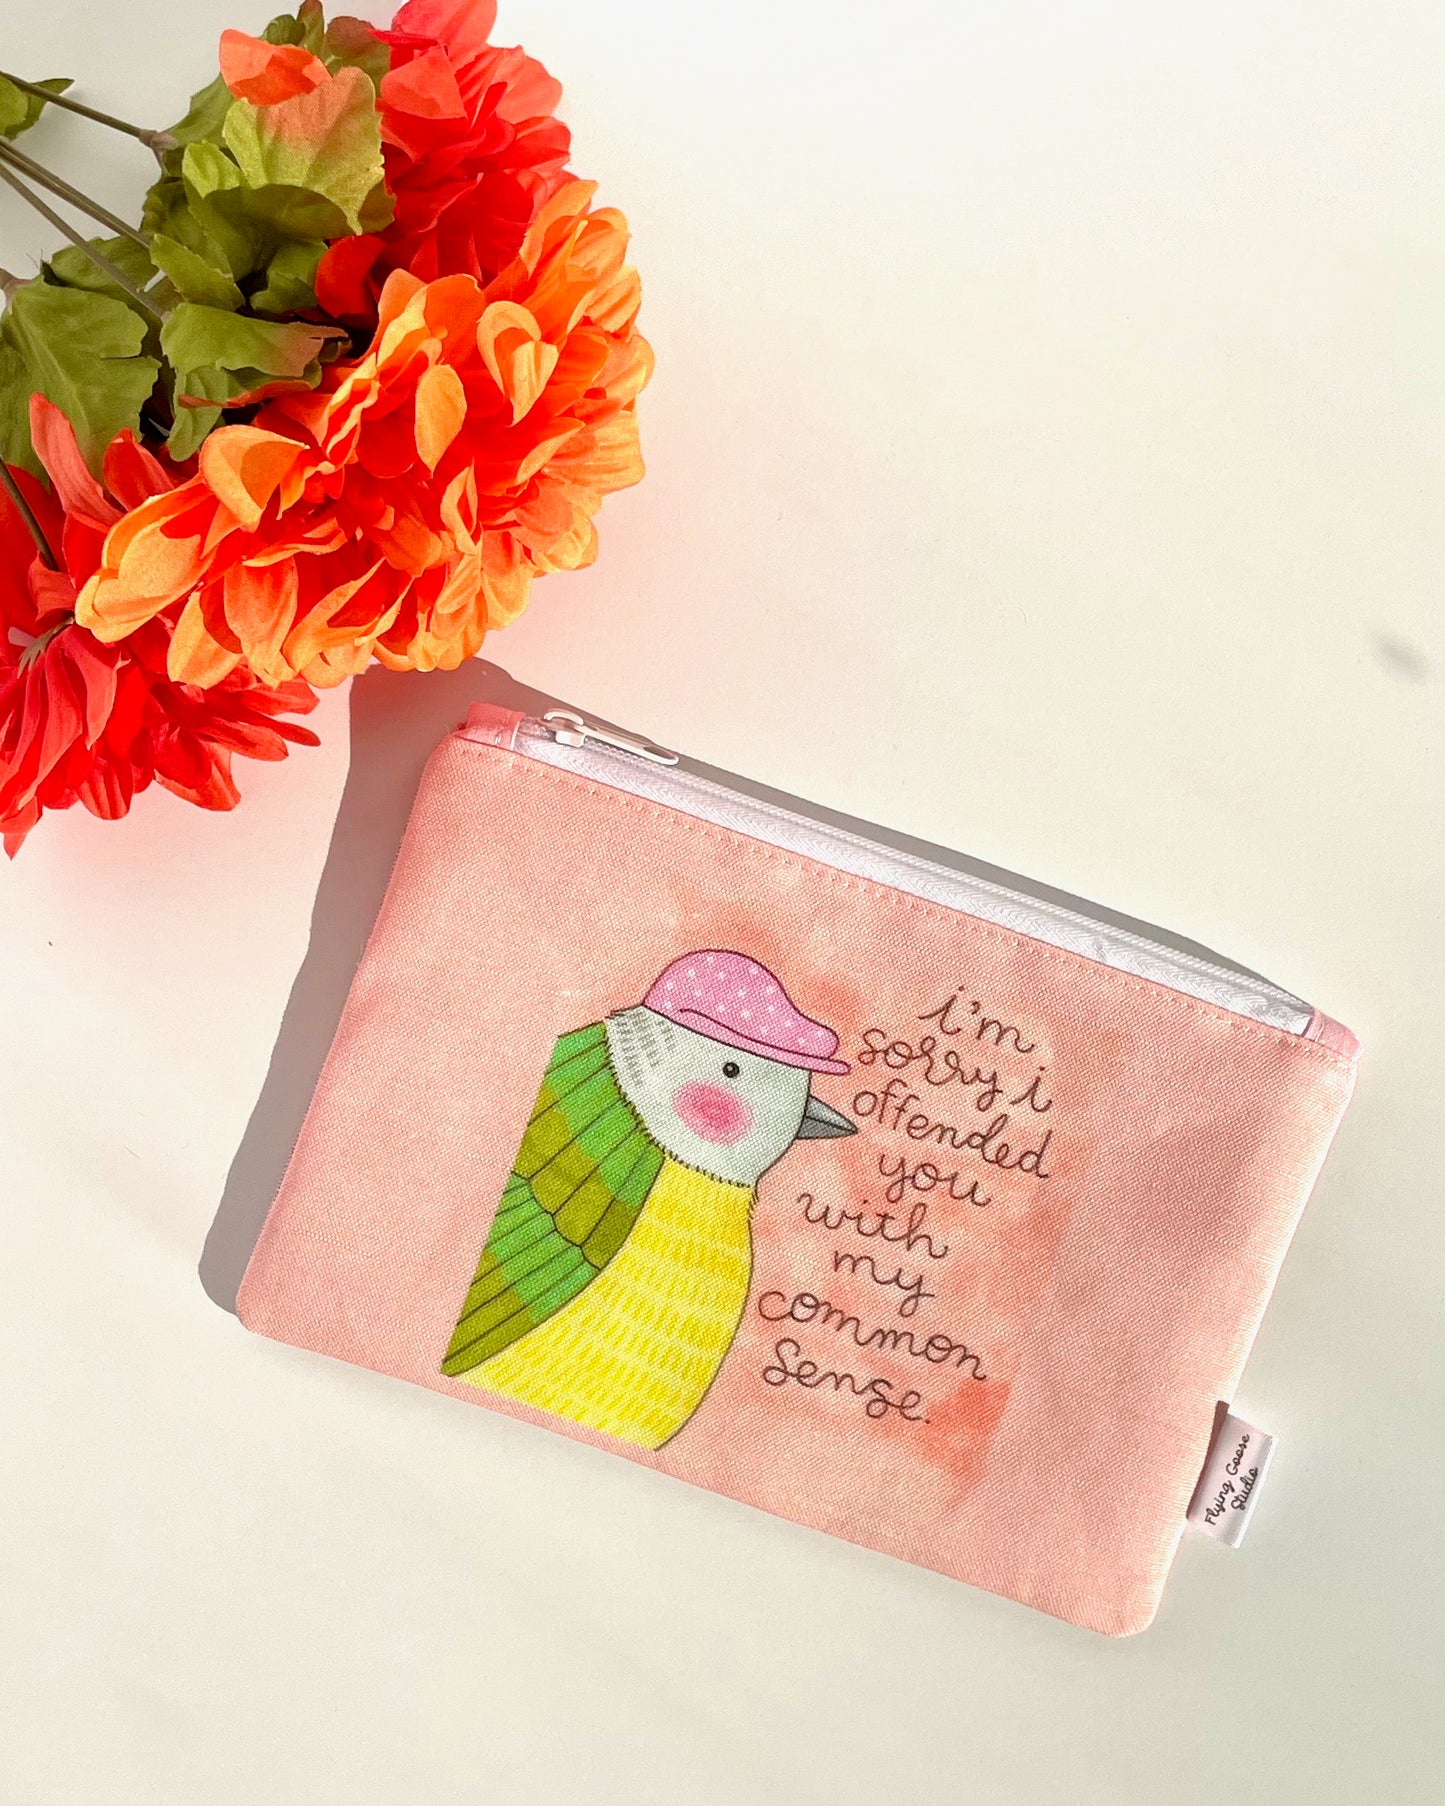 "Offended With Common Sense" Sweary Bird Zipper Pouch